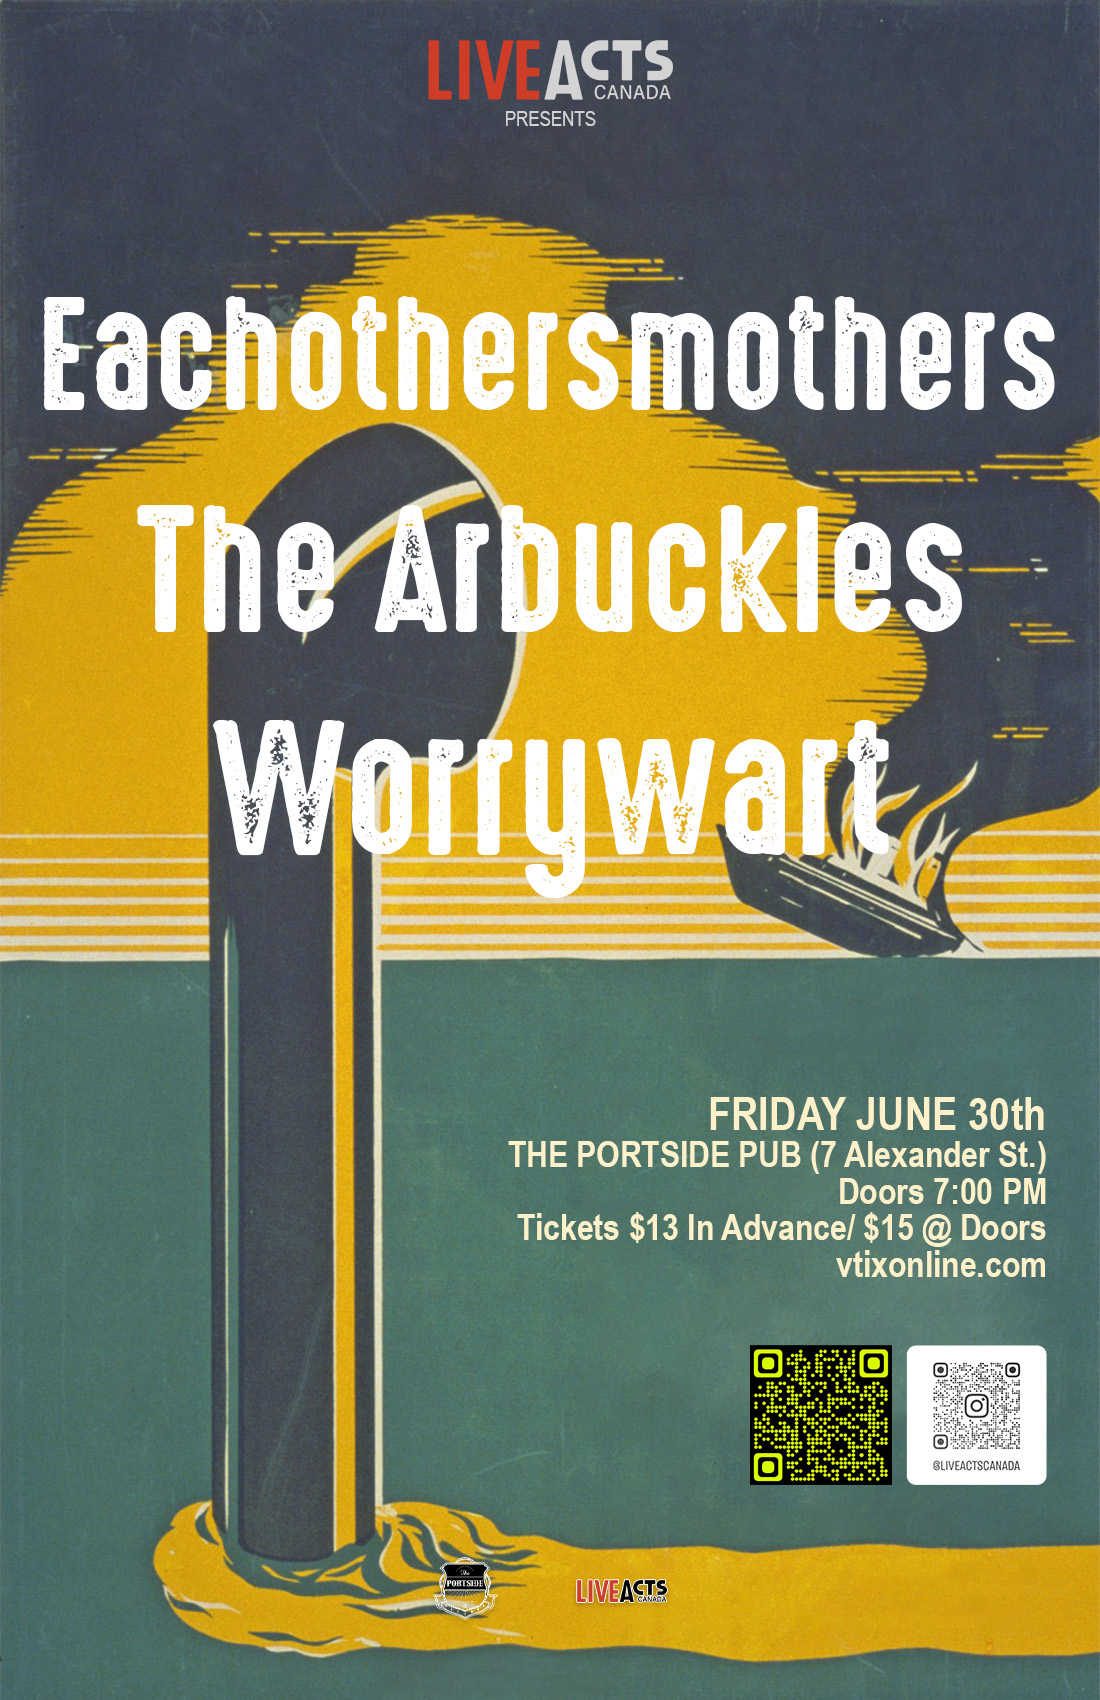 Eachothersmothers with Special Guests The Arbuckles and Worrywart